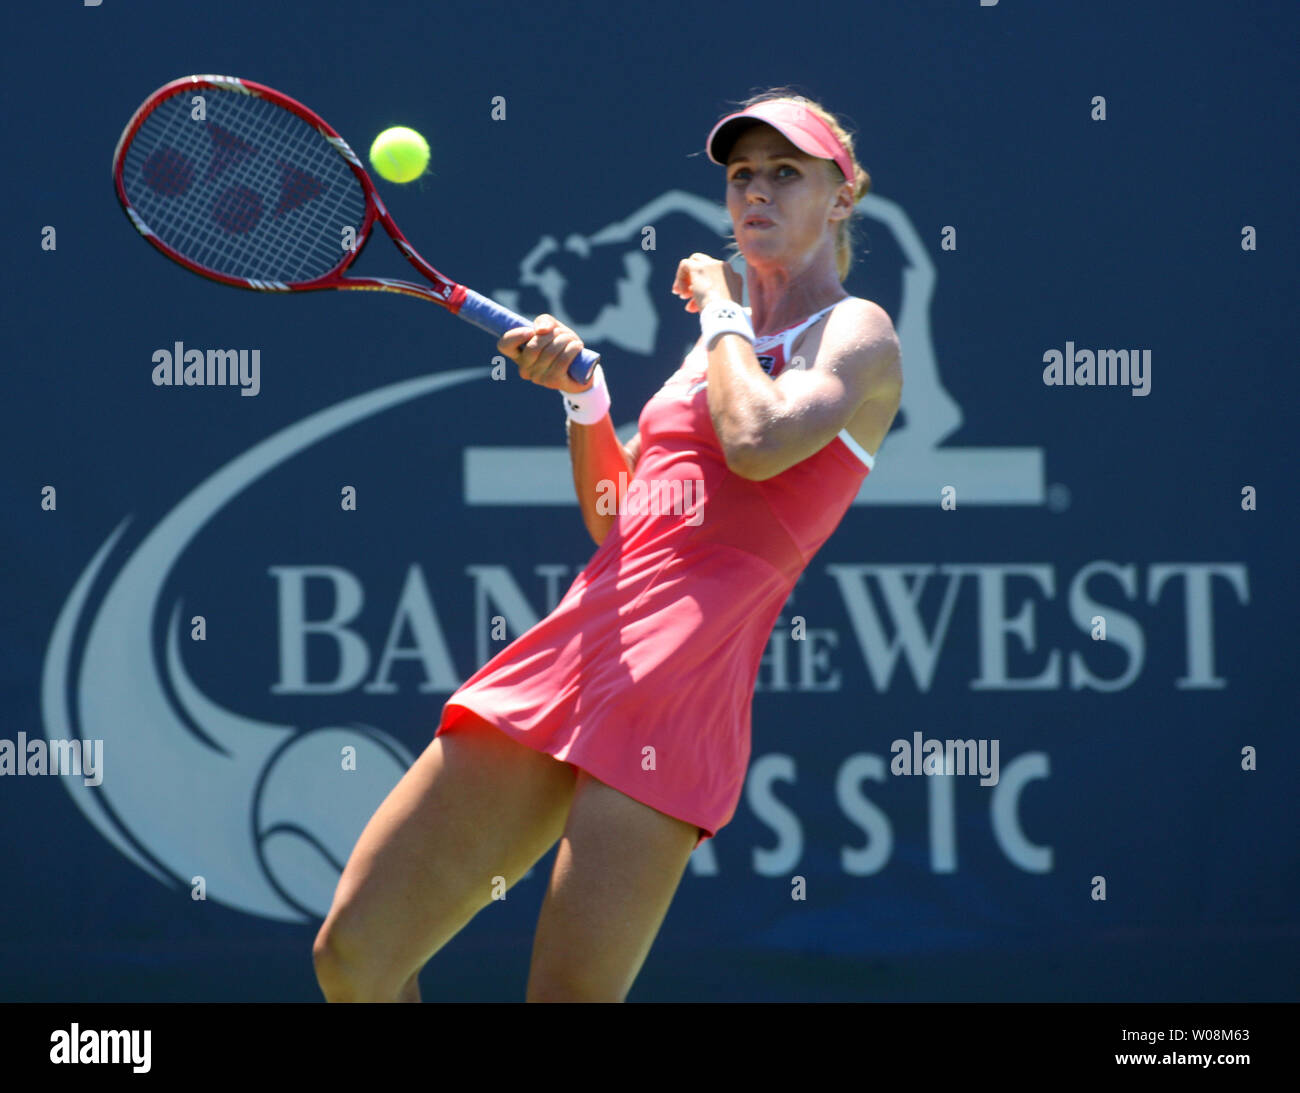 Elena Dementieva of Russia returns the ball to Venus Williams at the Bank of the West Classic at Stanford University in Palo Alto, California on August 1, 2009.  Williams defeated Dementieva 6-0, 6-1.  UPI/Terry Schmitt Stock Photo